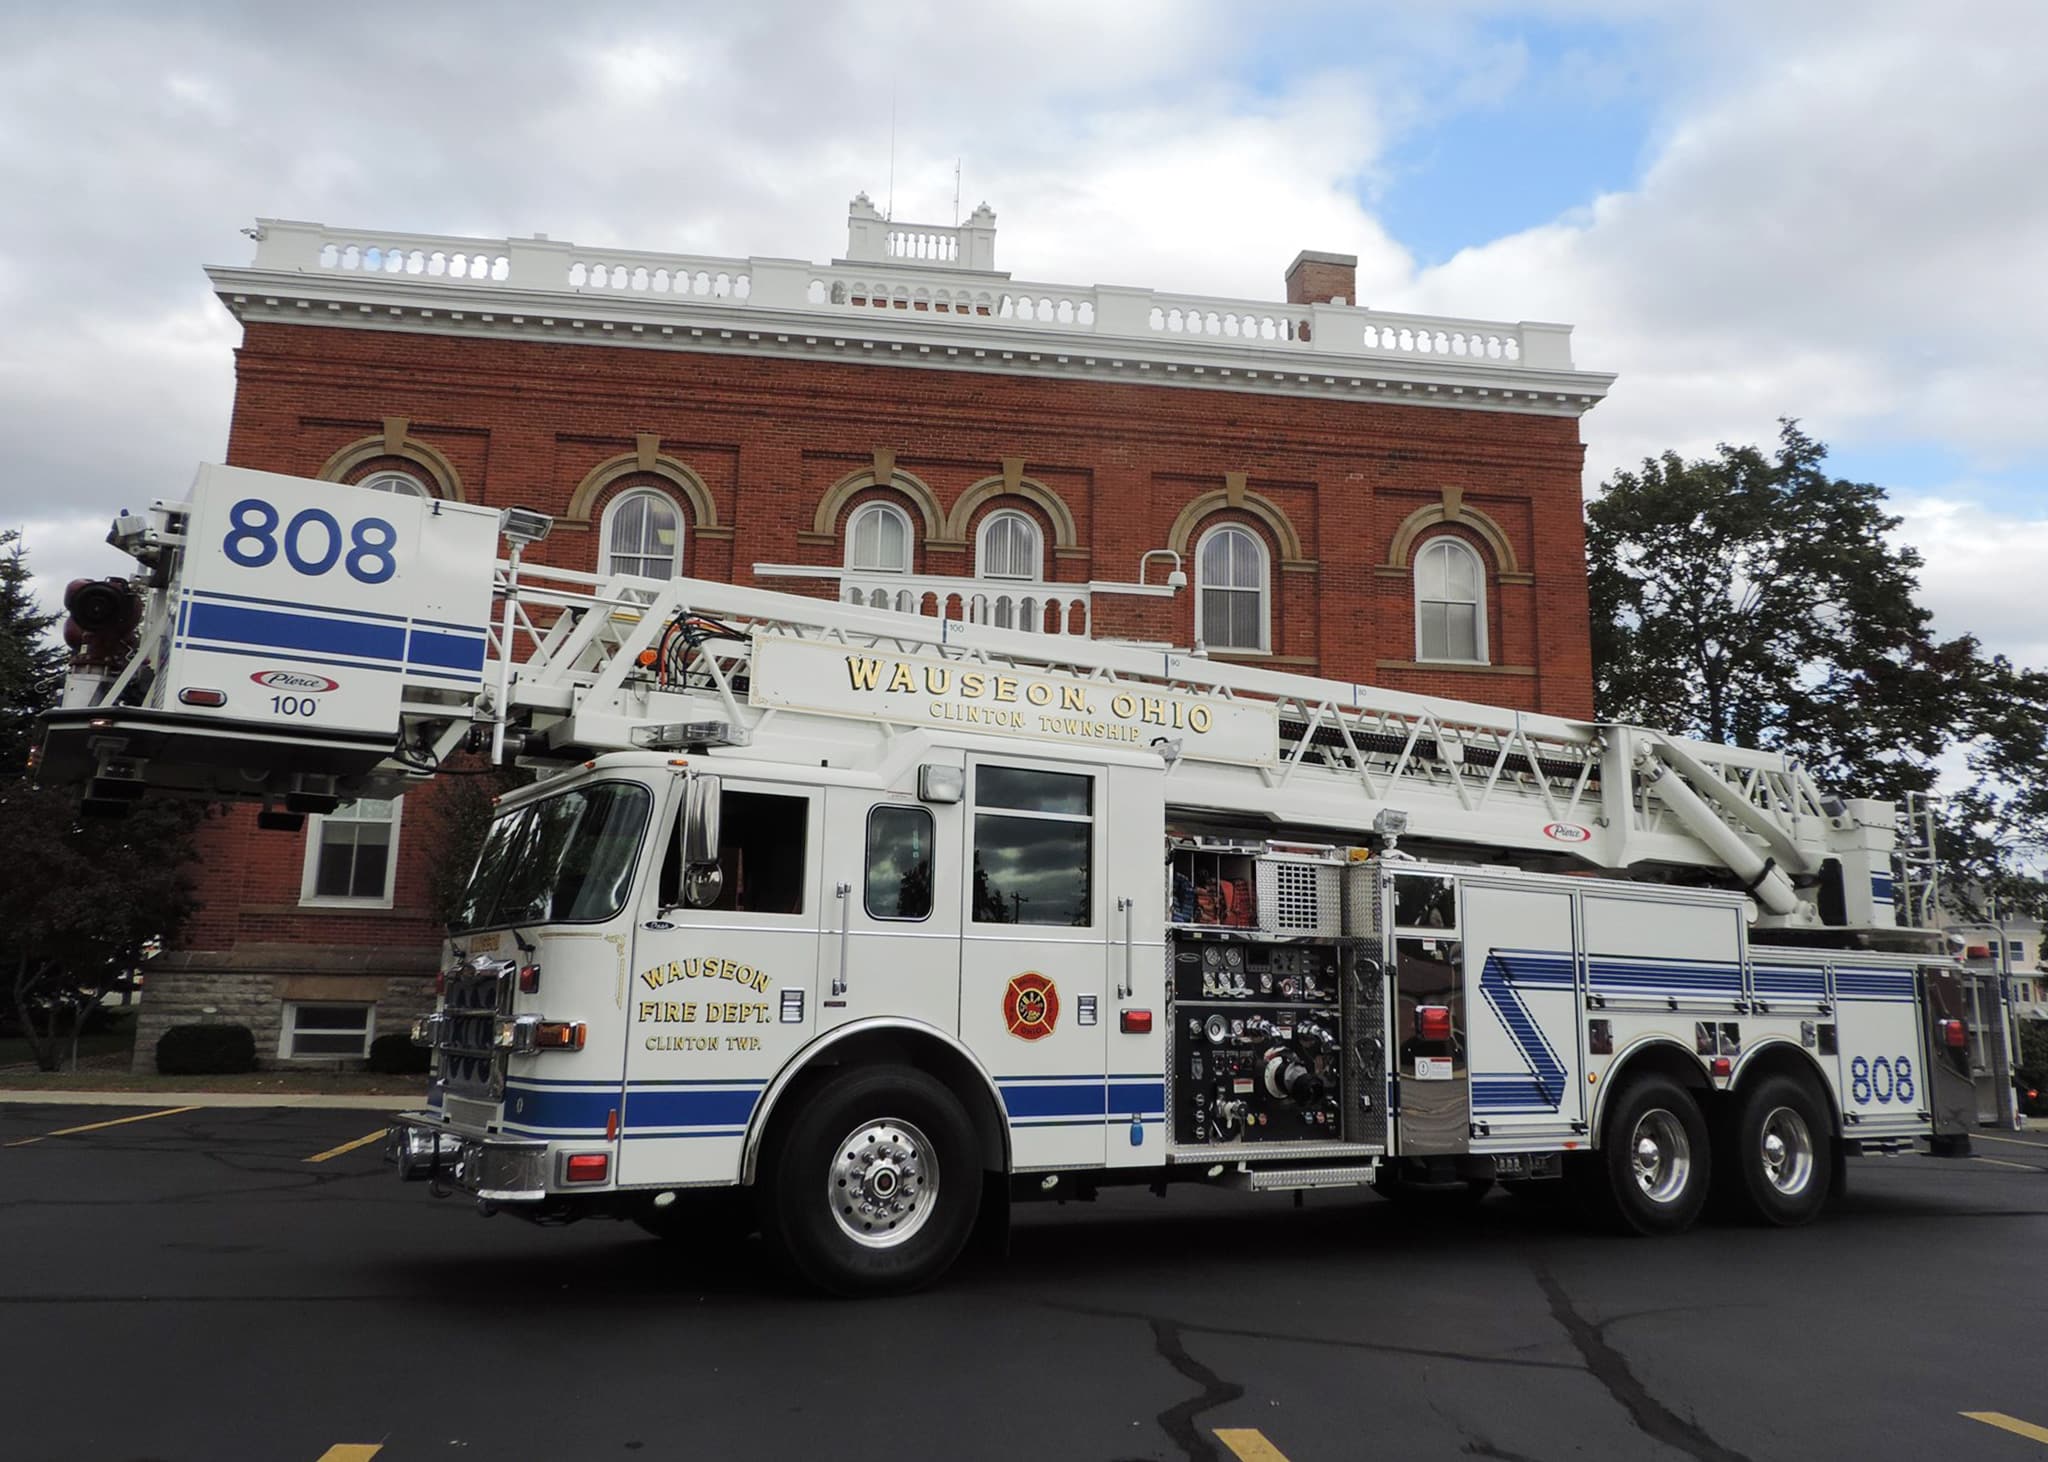 Ladder 808 parked in front of the Fulton County Courthouse